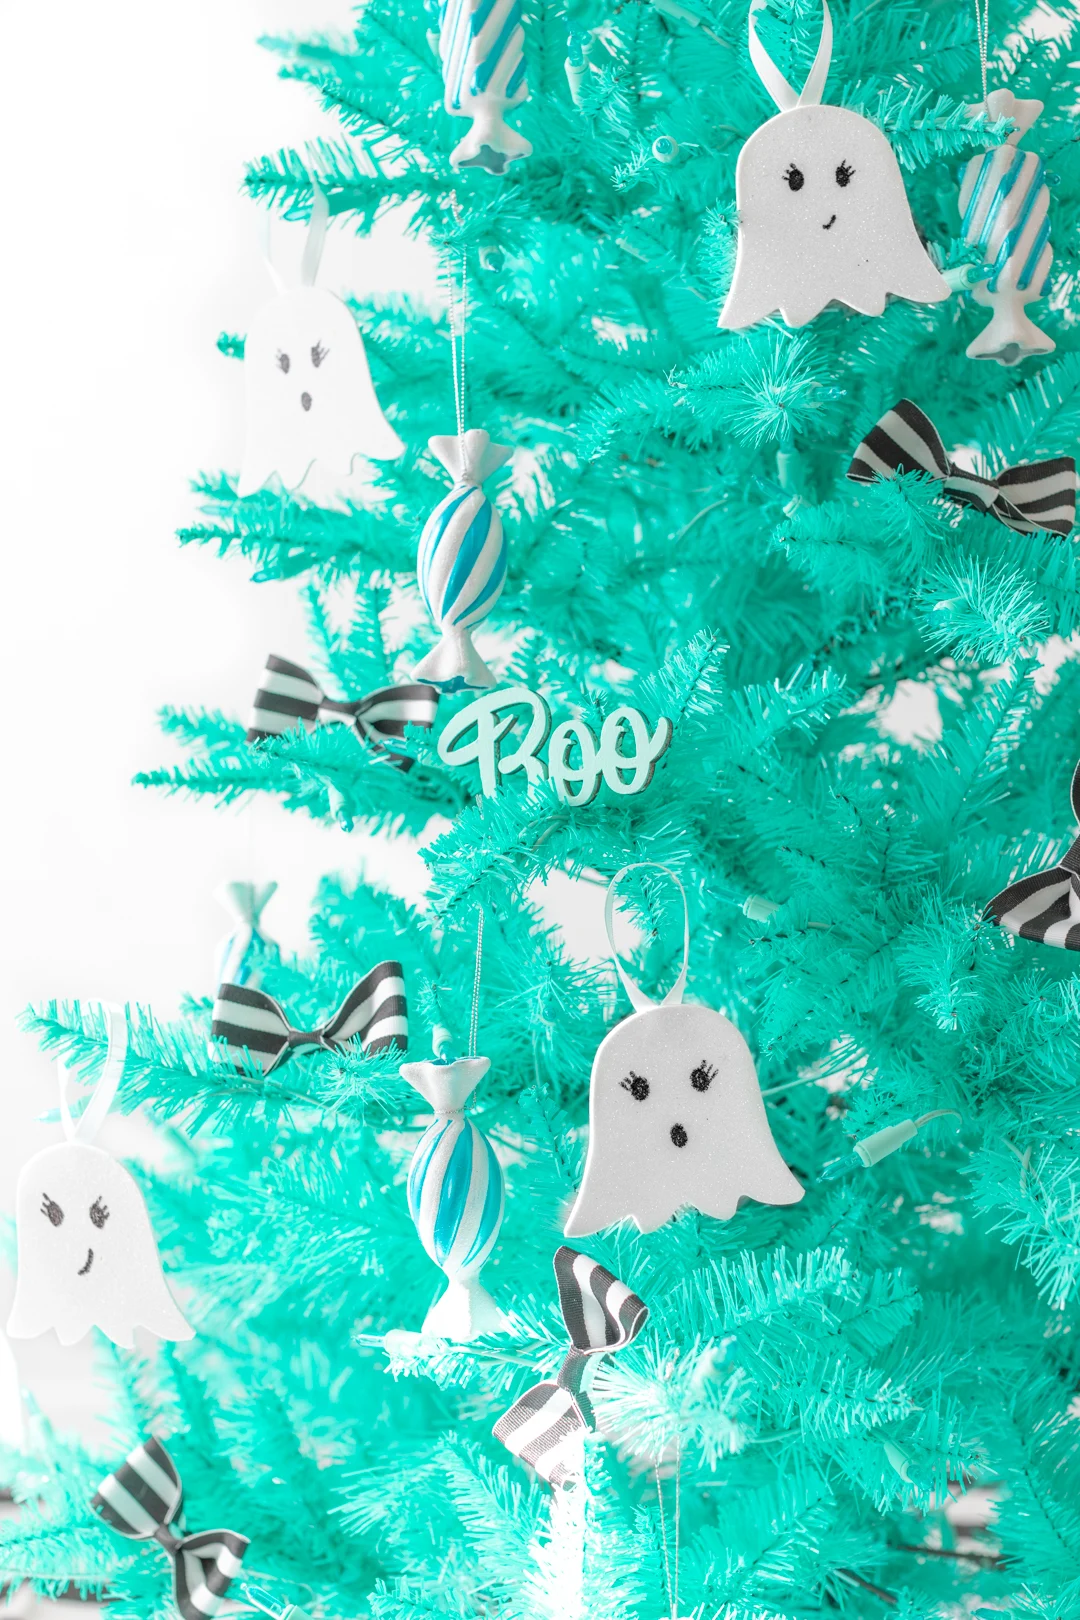 teal christmas tree decorated for halloween with ghost ornaments and candy ornaments